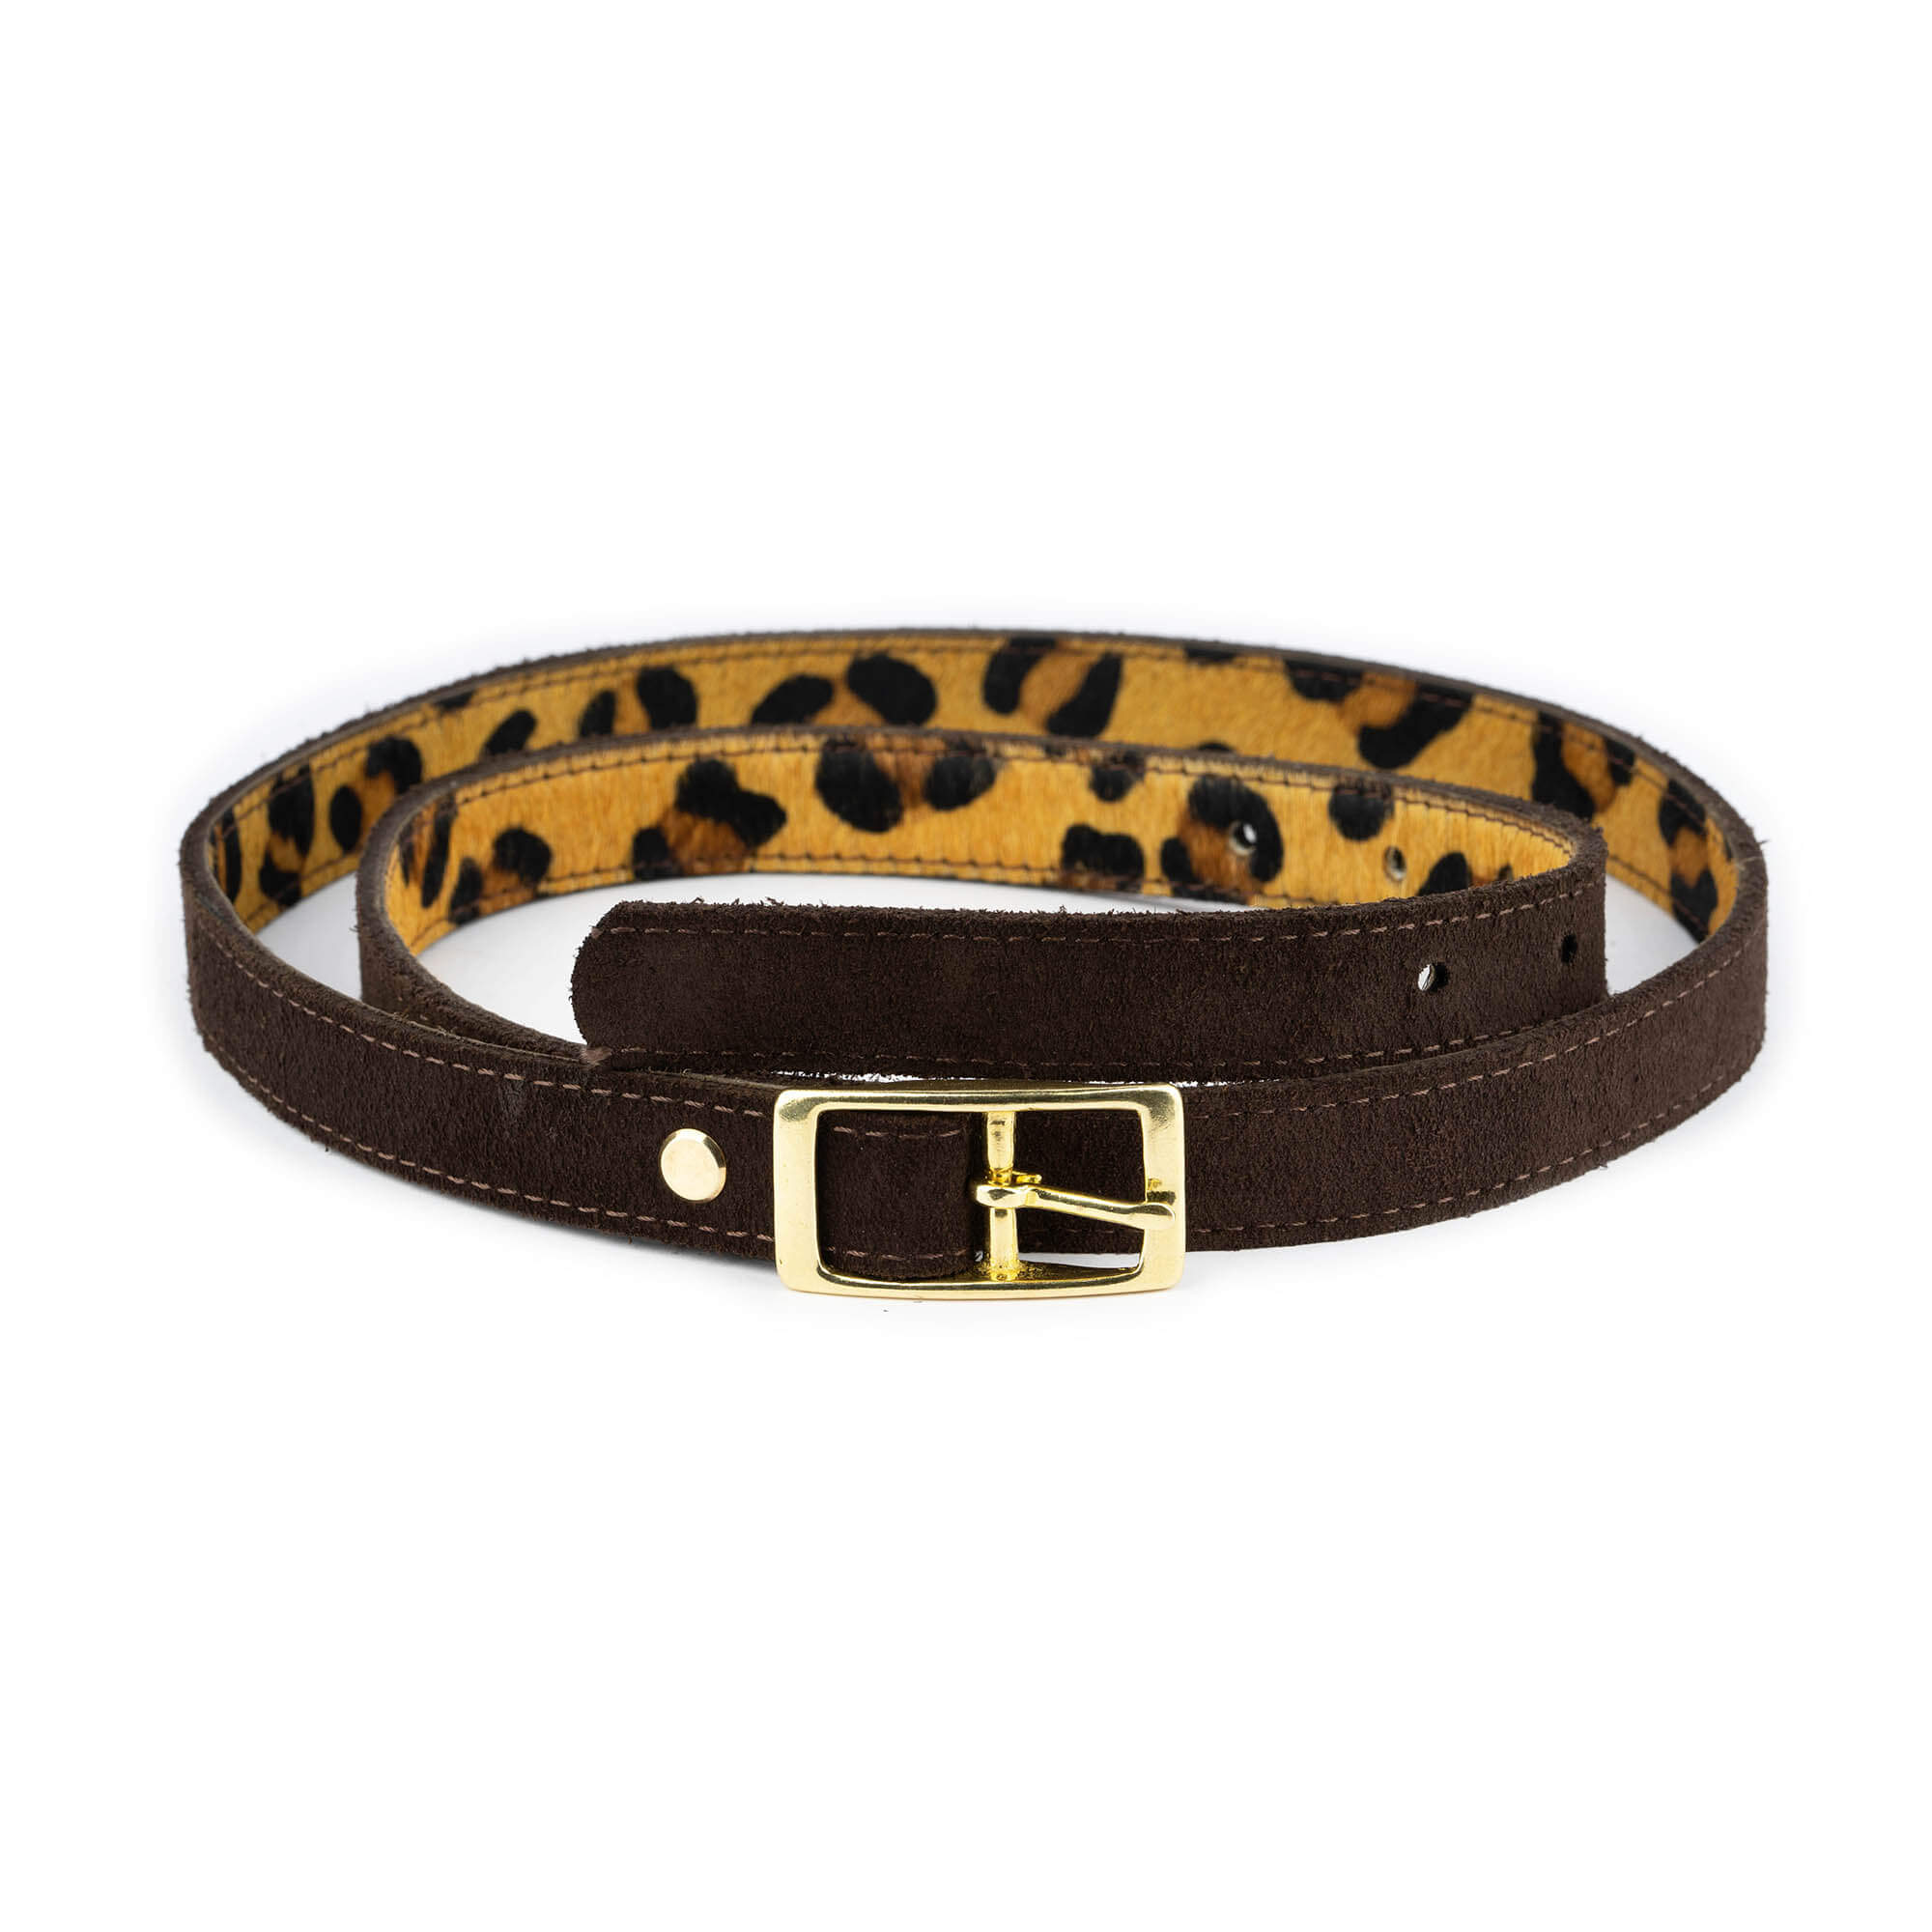 Buy Brown Calf Hair Belt With Gold Brass Buckle | Capo Pelle